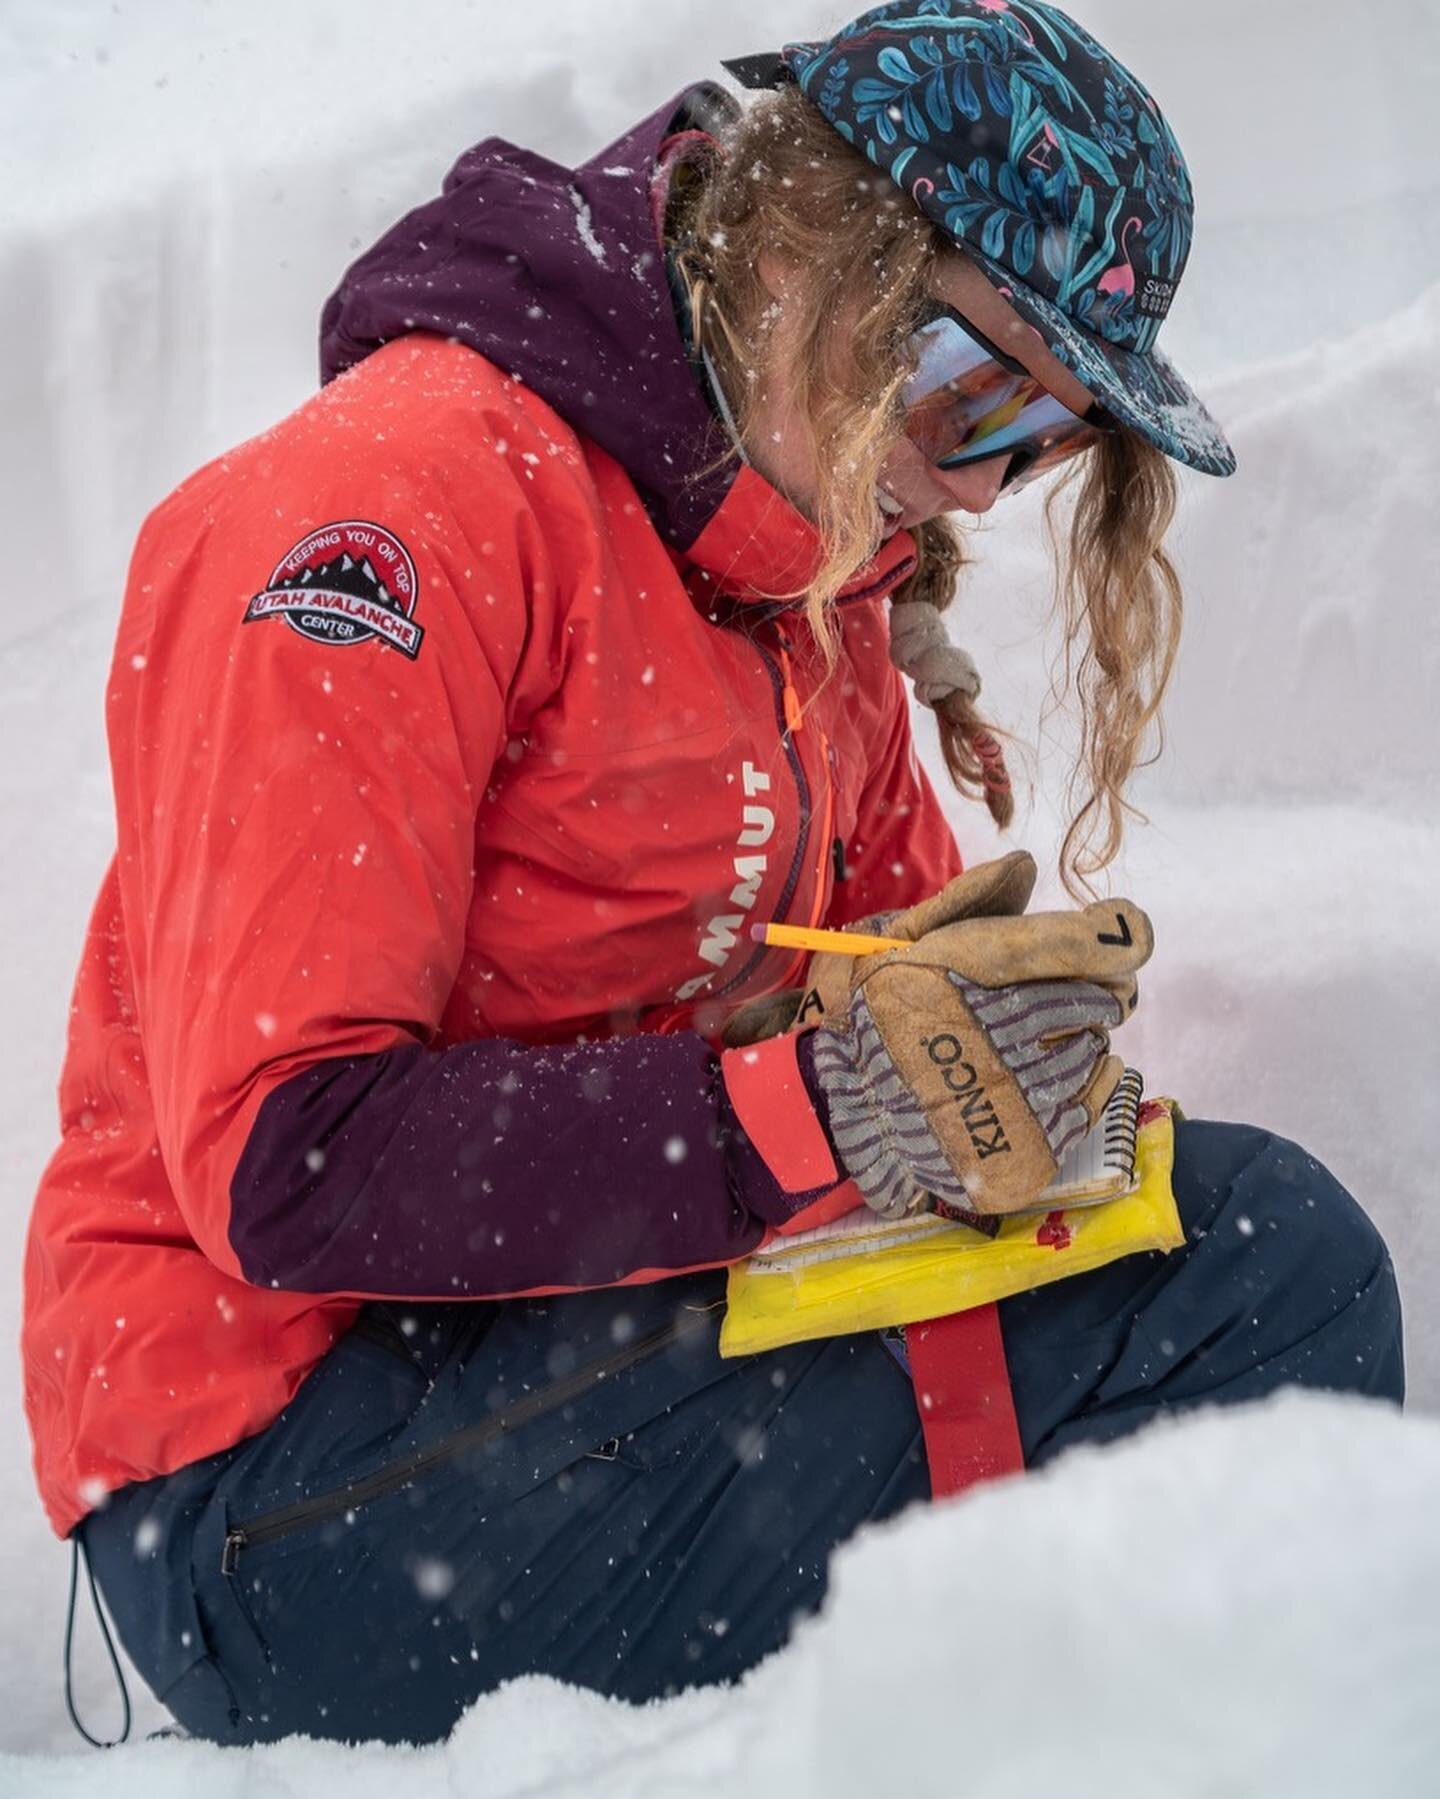 Episode 6.25 is up- and features Nikki Champion- an avalanche forecaster with the Utah Avalanche Center.  Nikki grew up skiing on the icy hills of Michigan, but transitioned out west as quickly as possible. She earned a BS in Civil Engineering from M